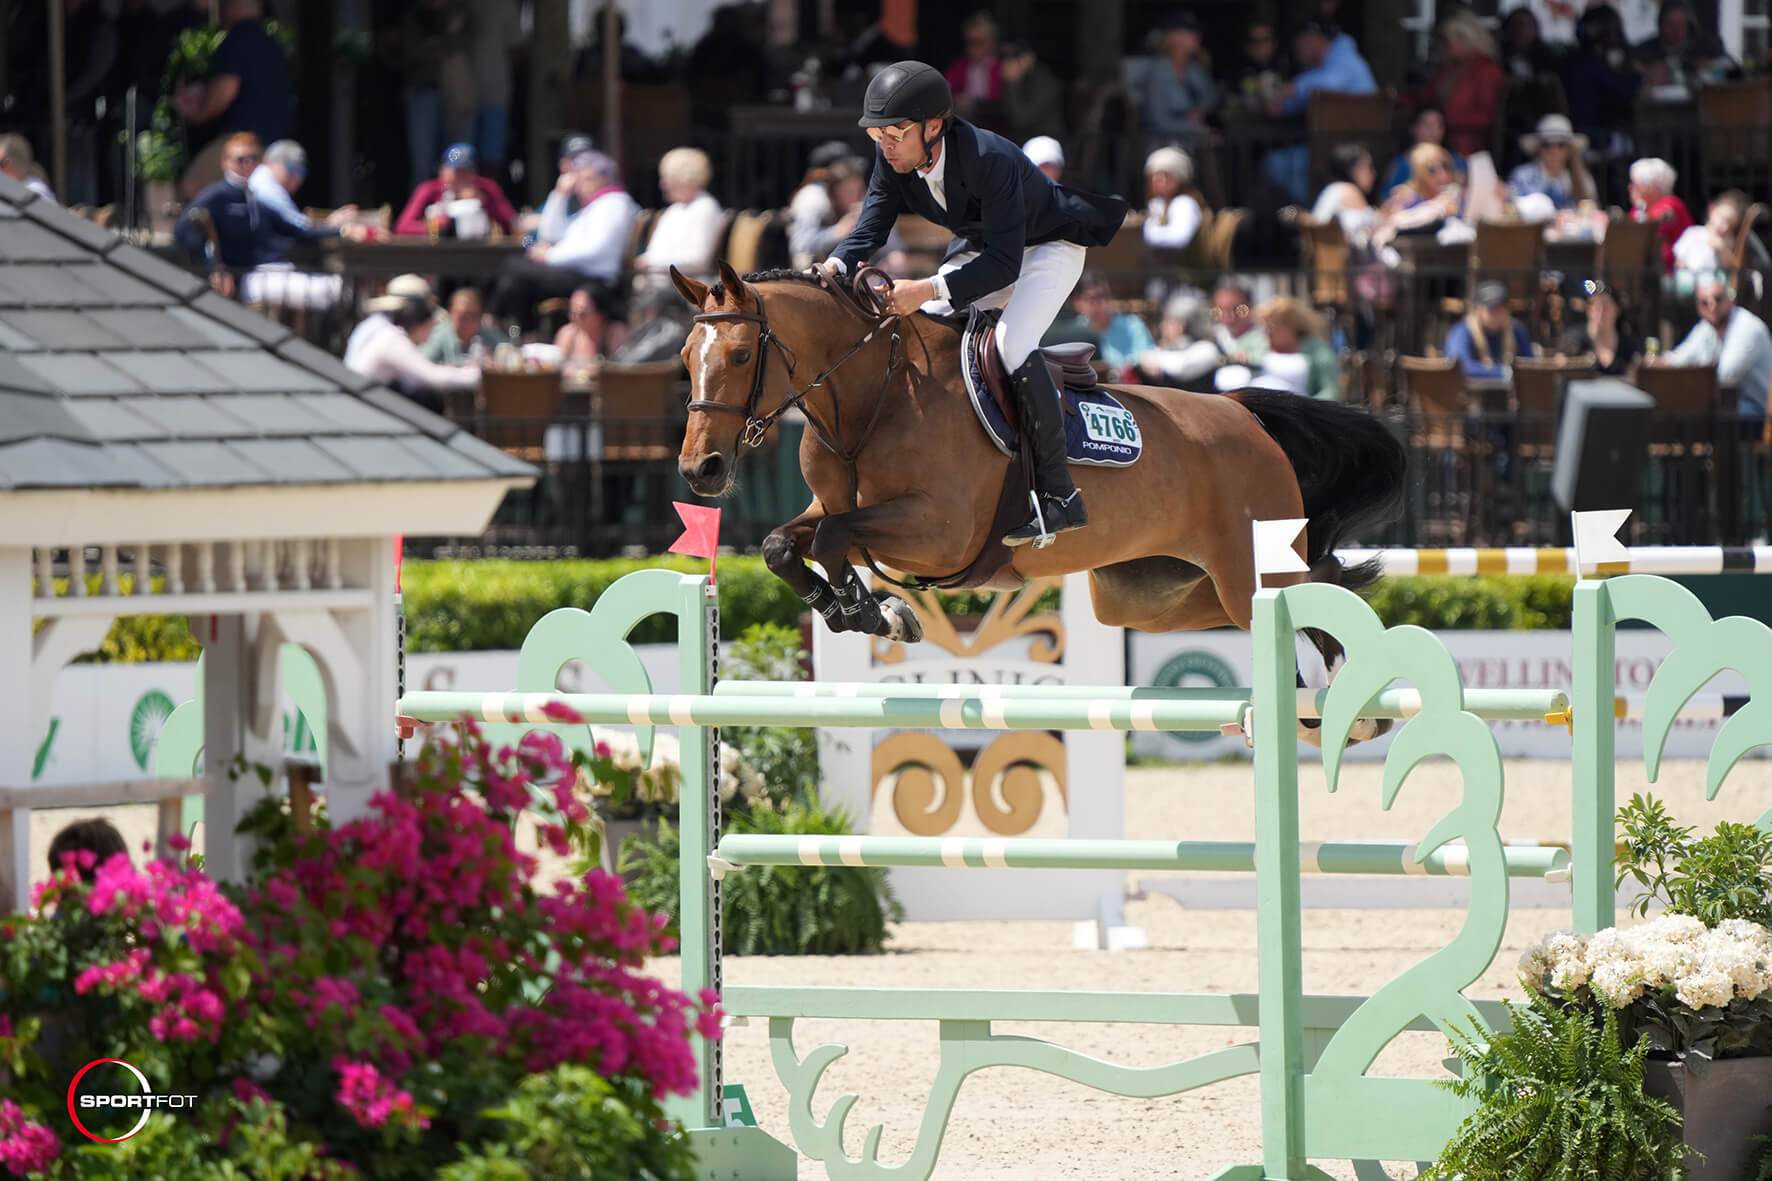 Karl Cook and Kalinka van 't Zorgvliet conclude their WEF with a win